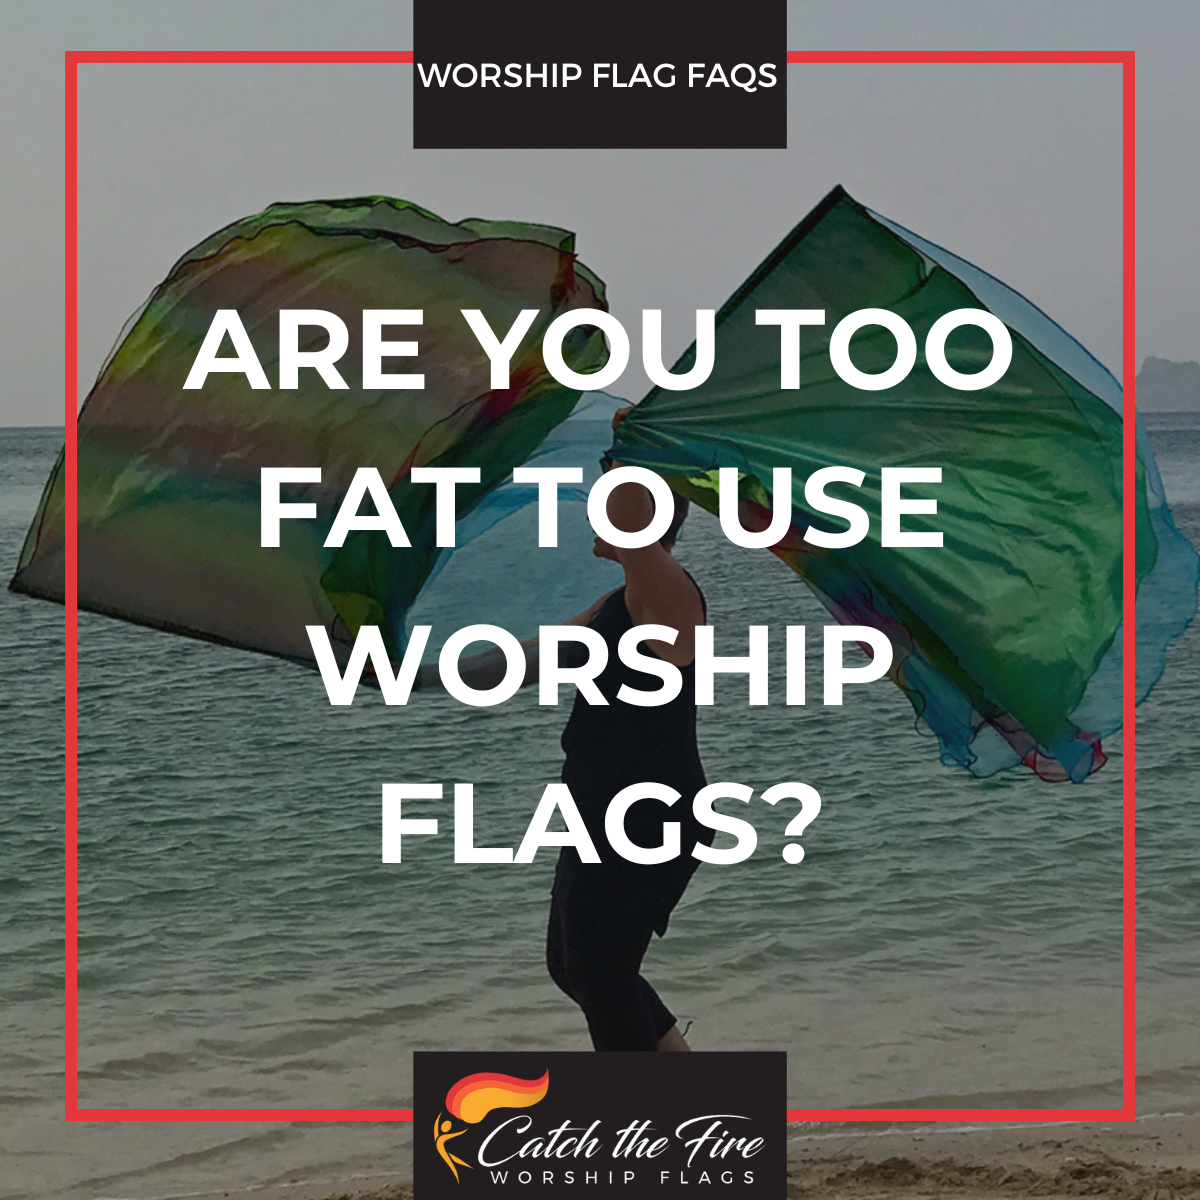 Are You Too Fat to Use Worship Flags